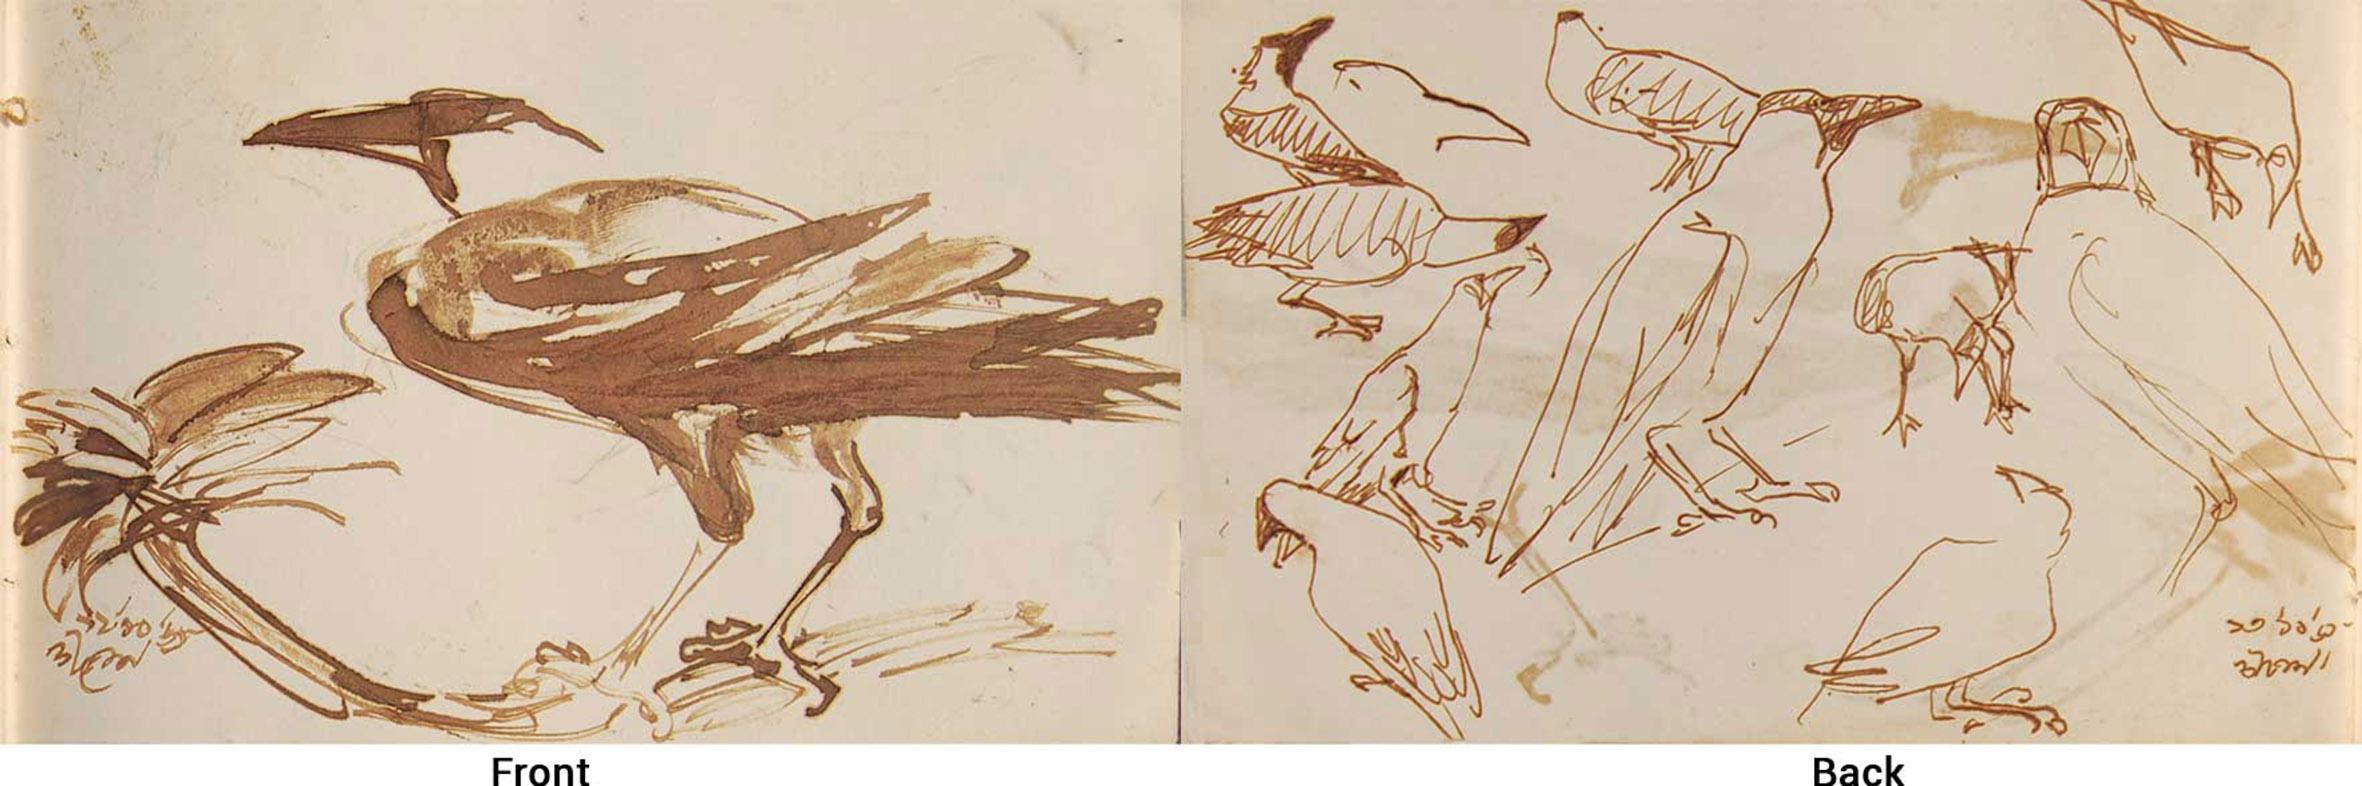 Dipen Bose Animal Painting - Crows Series, Watercolour on paper, Rare Art by Indian Bengal Artist "In Stock"